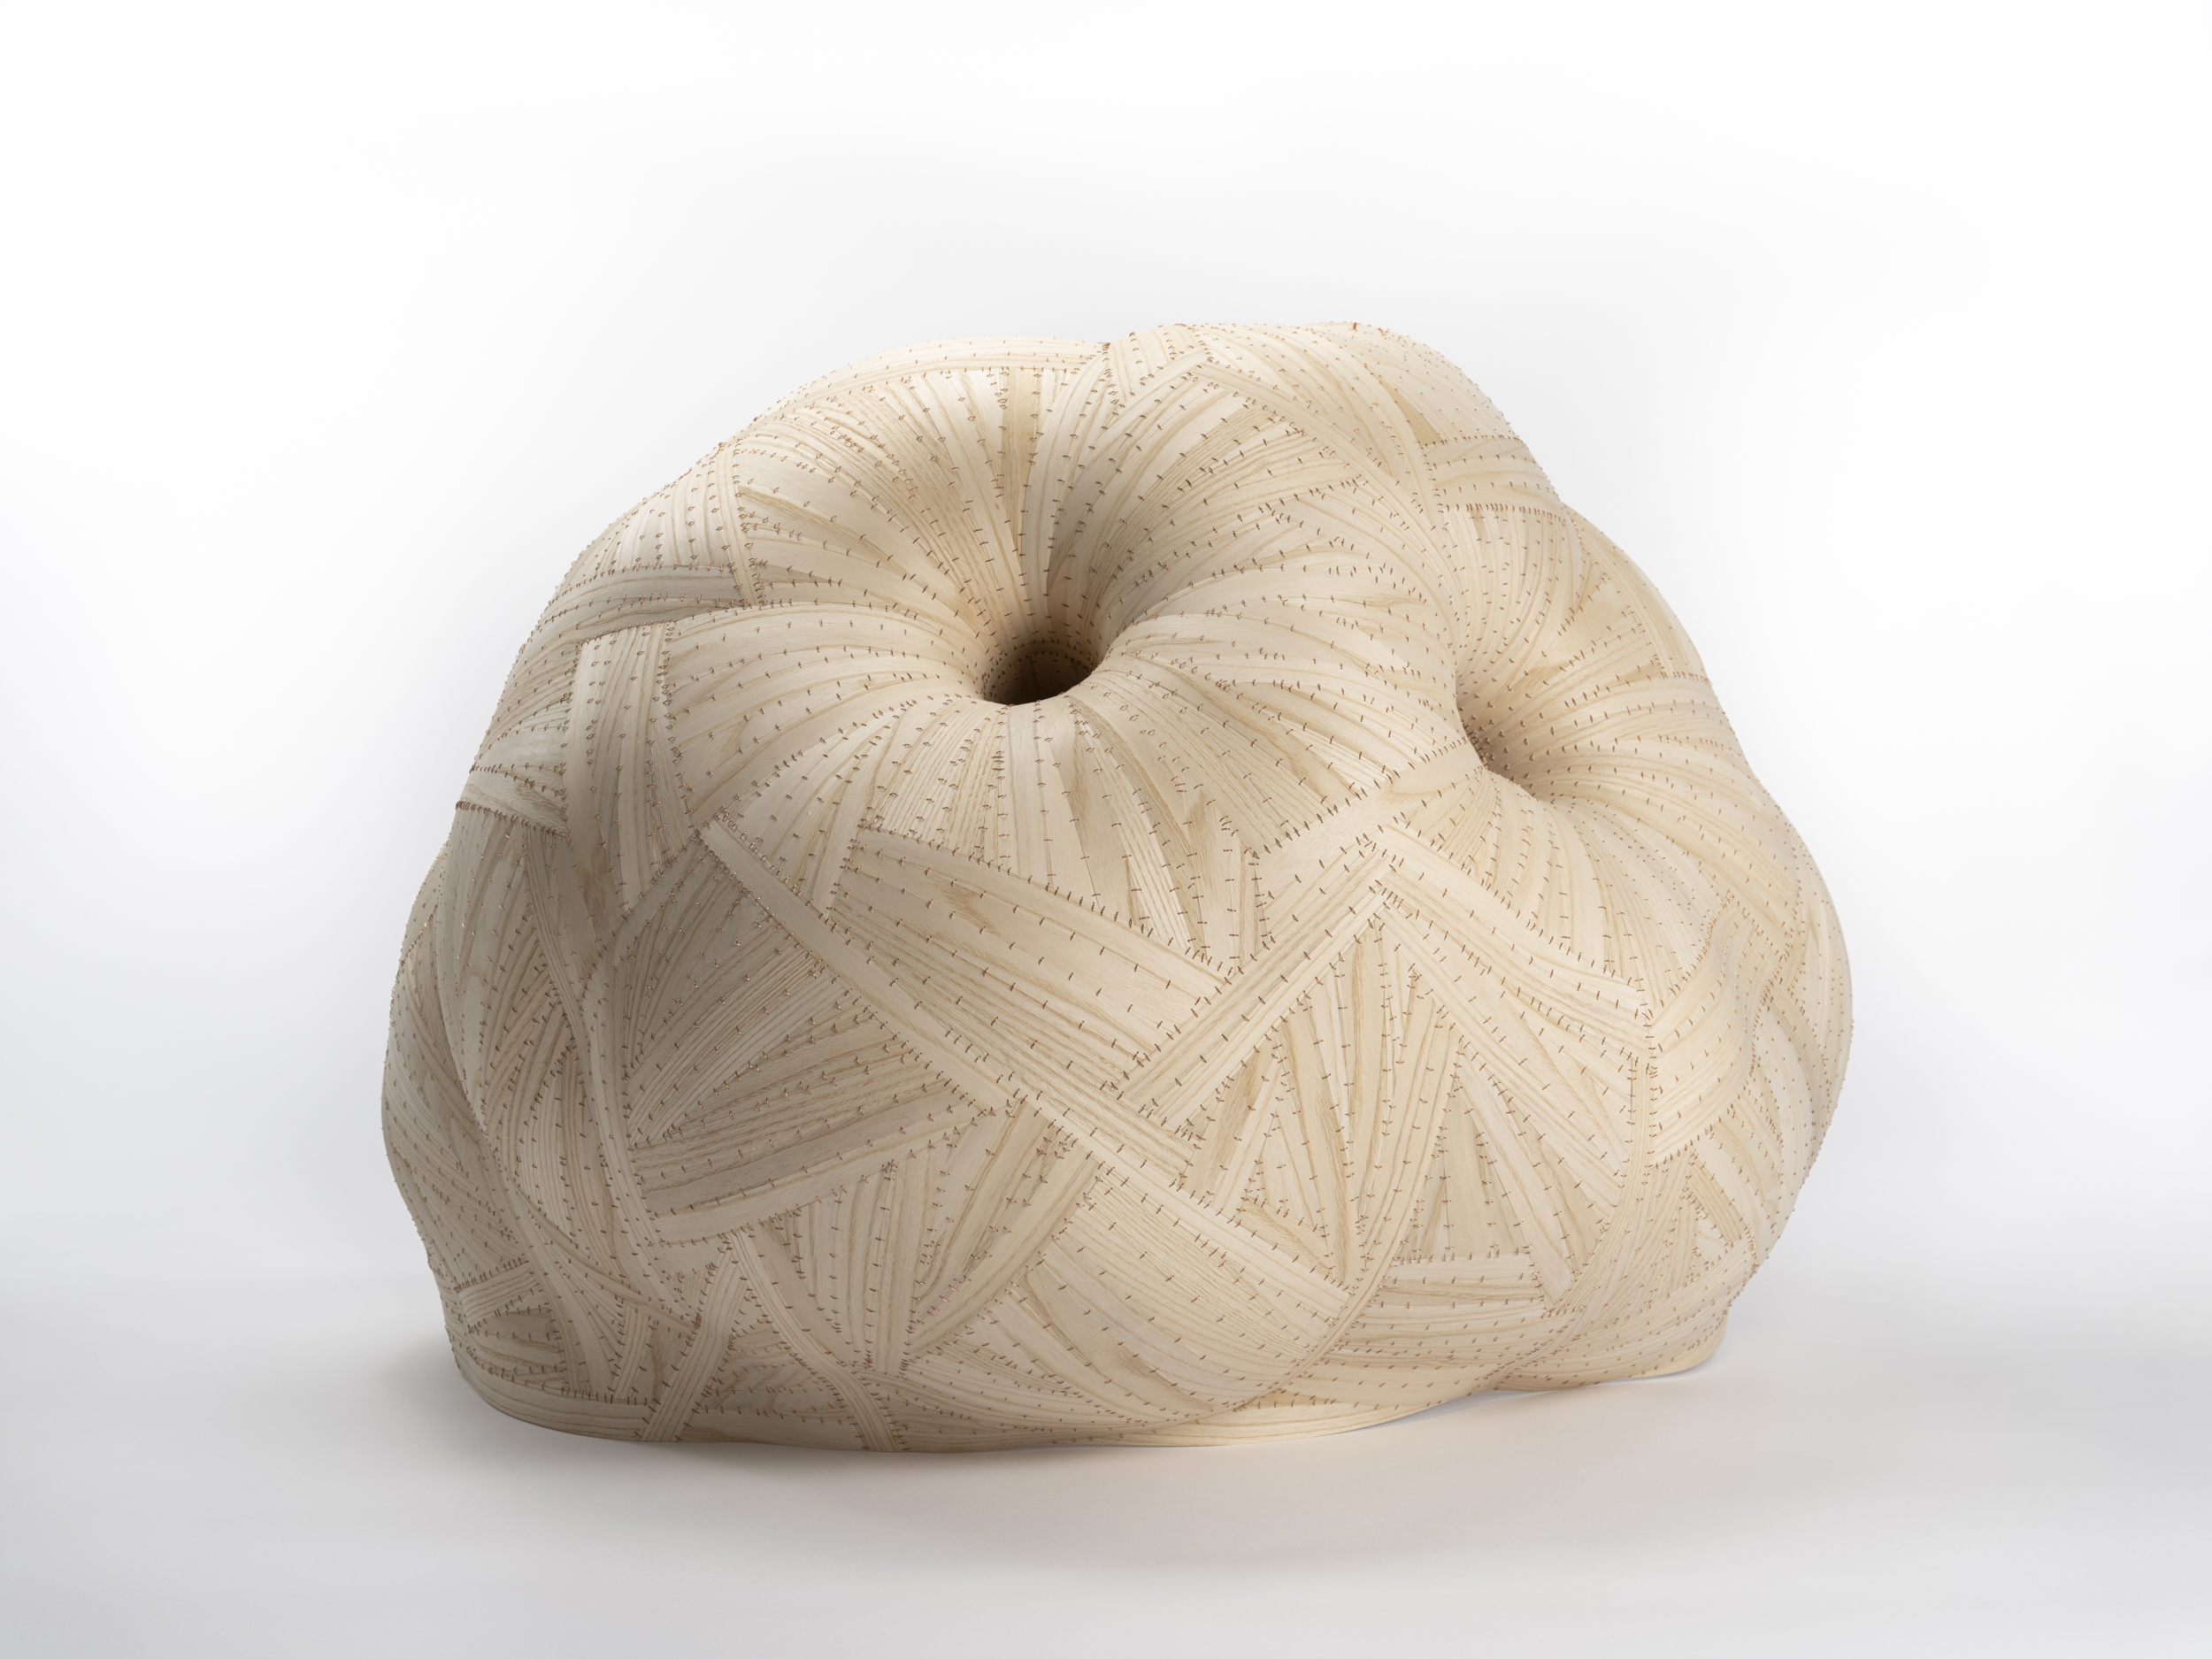 Kim's work was recently shortlisted for the prestigious Loewe Craft Prize